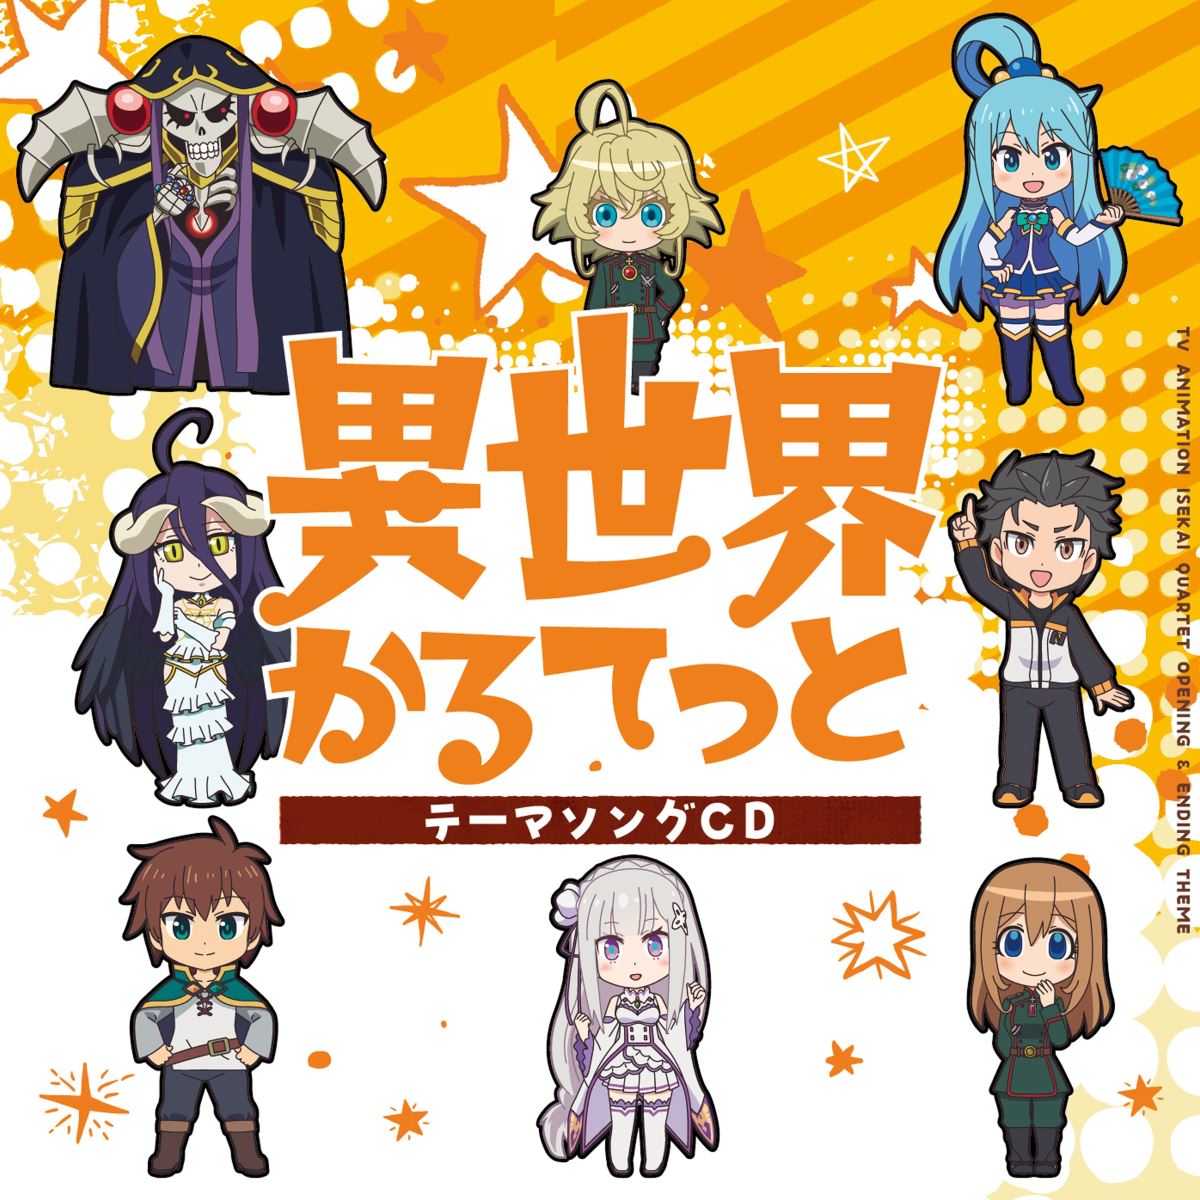 Anime - Isekai Quartet 2 • The Isekai school physical happened this episode  , and this was mainly a Megumin episode🔥 • Megumin was... | Instagram